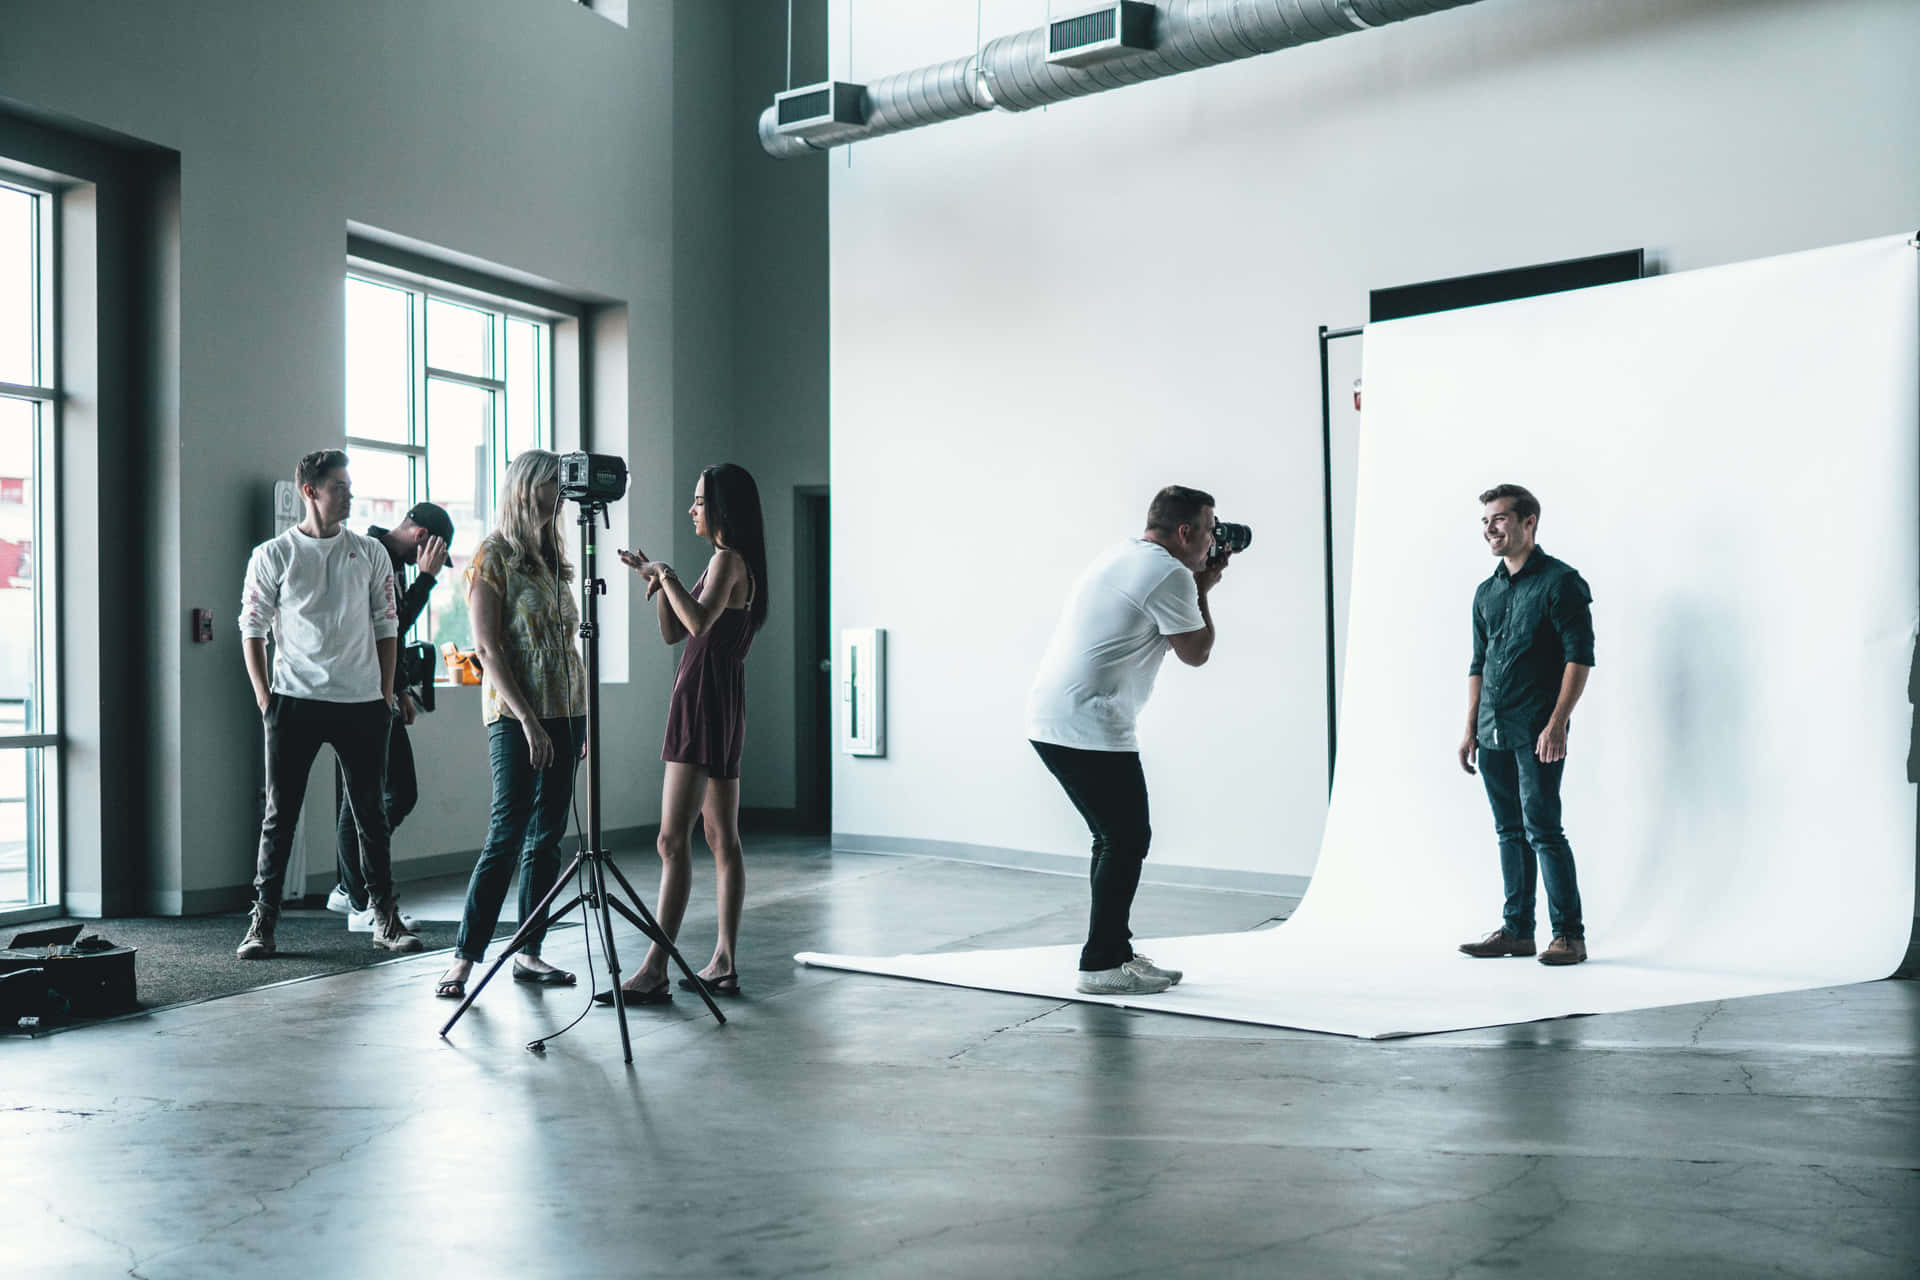 A Group Of People In A Studio Taking Pictures